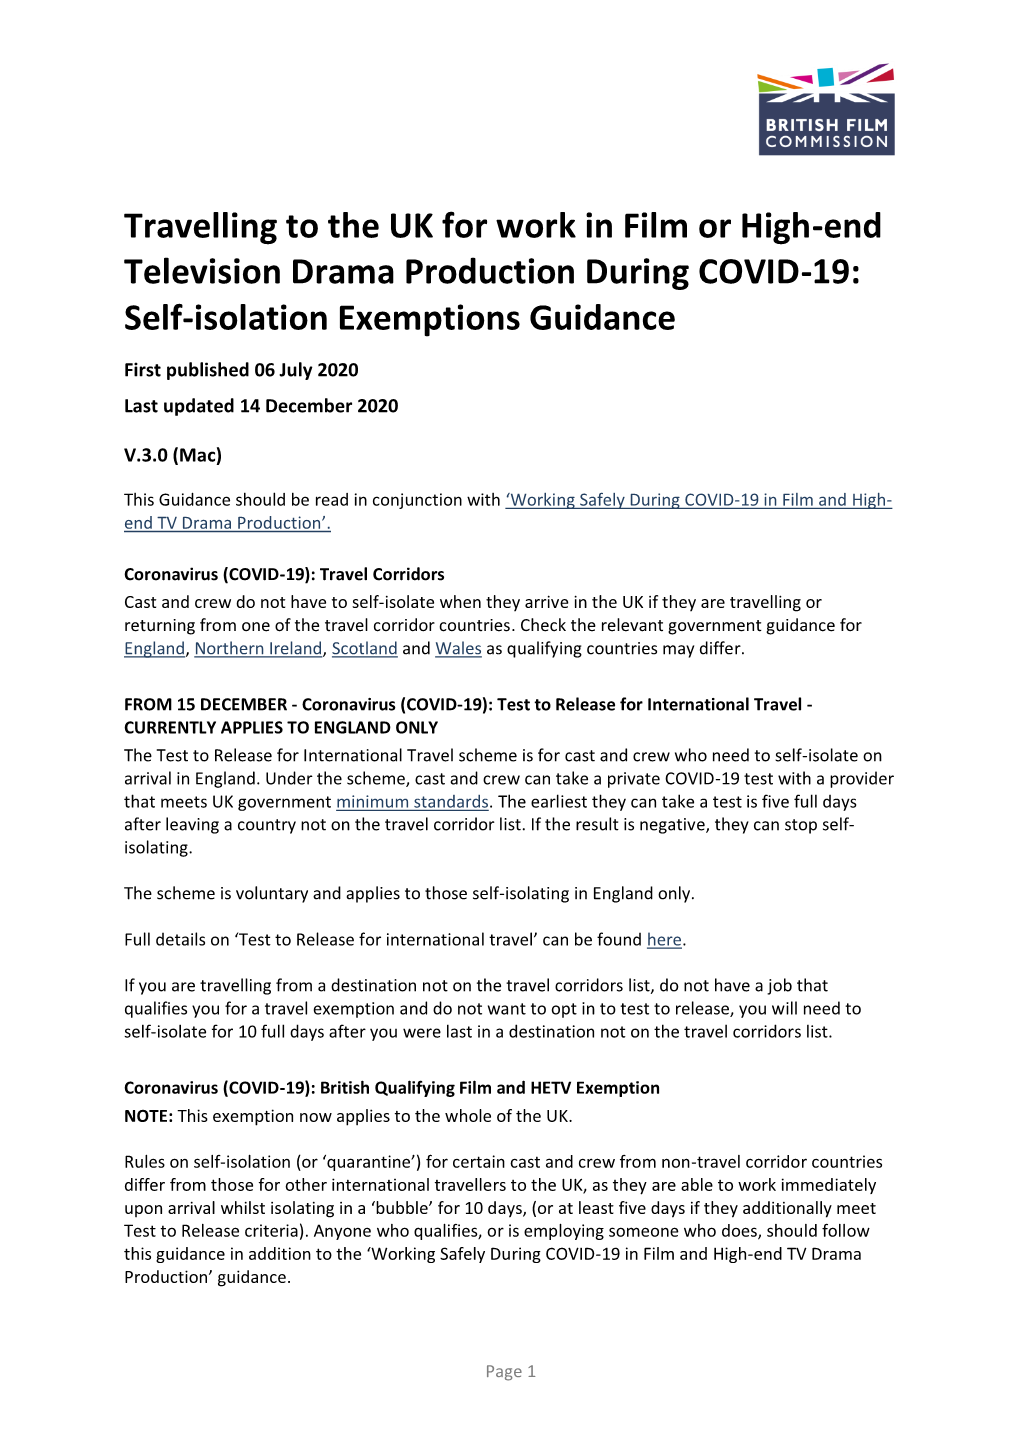 Travelling to the UK for Work in Film Or High-End Television Drama Production During COVID-19: Self-Isolation Exemptions Guidance